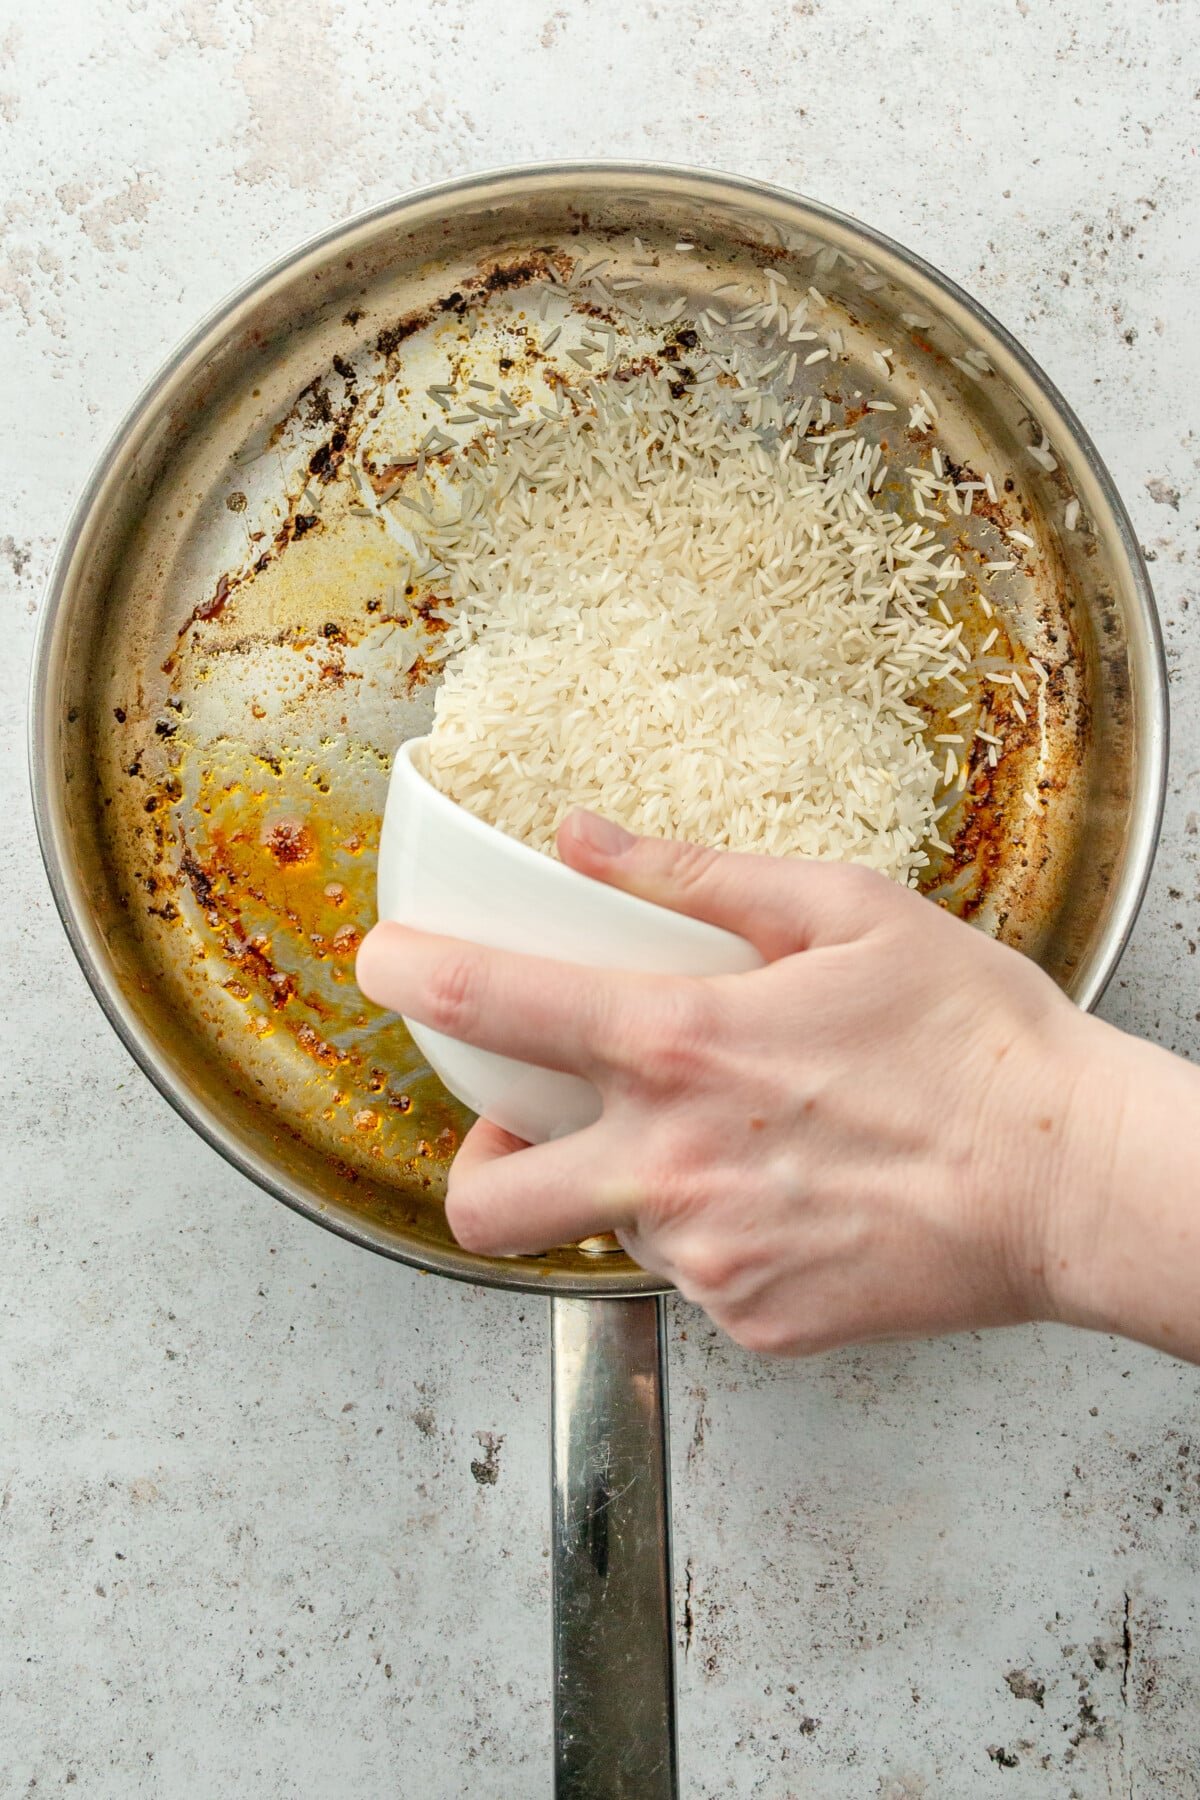 Rice is tossed into a stainless steel frying pan on a light grey surface.